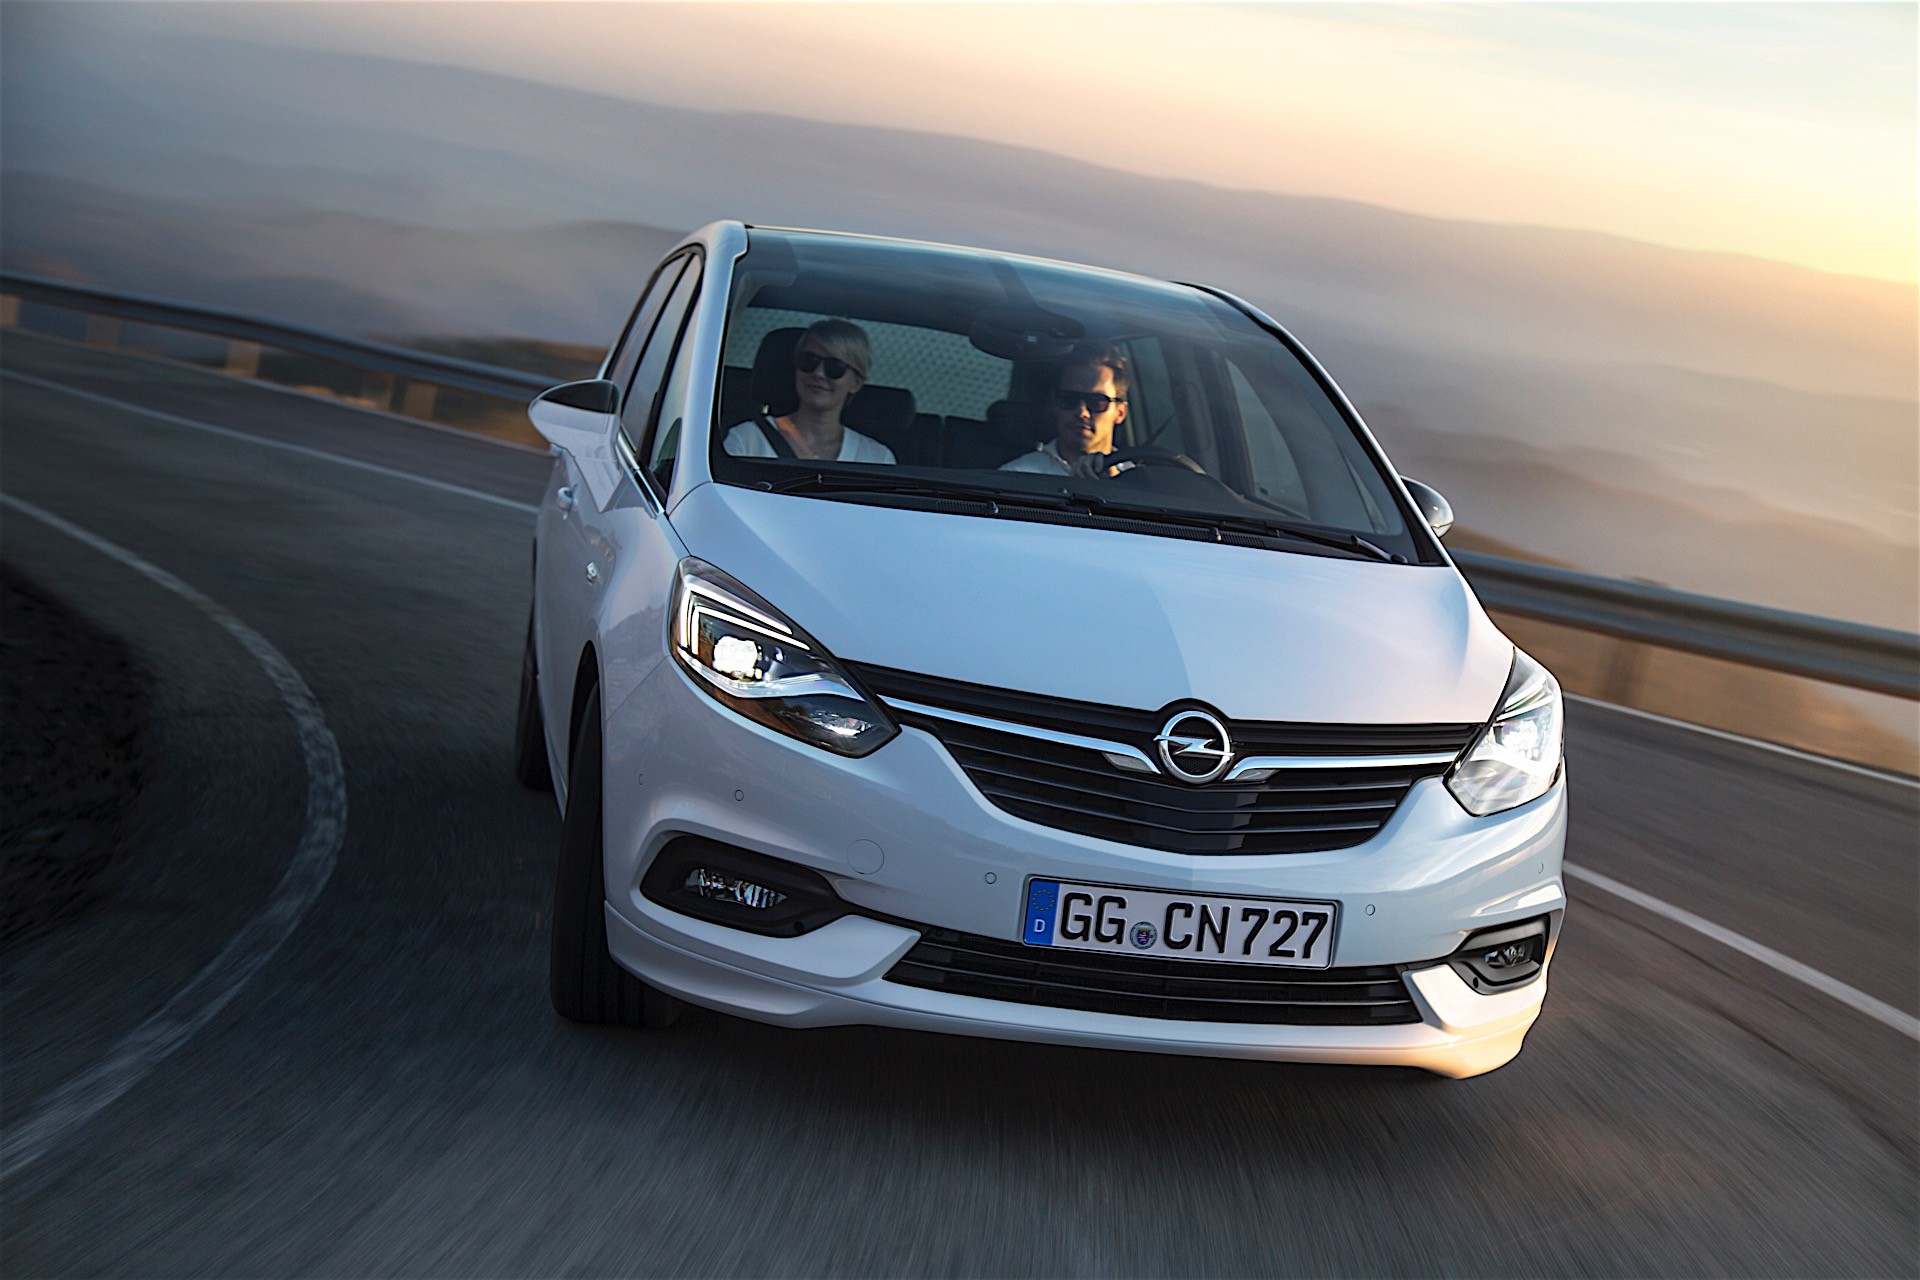 2017 Opel Zafira Officially Revealed, Looks Great For An MPV ...